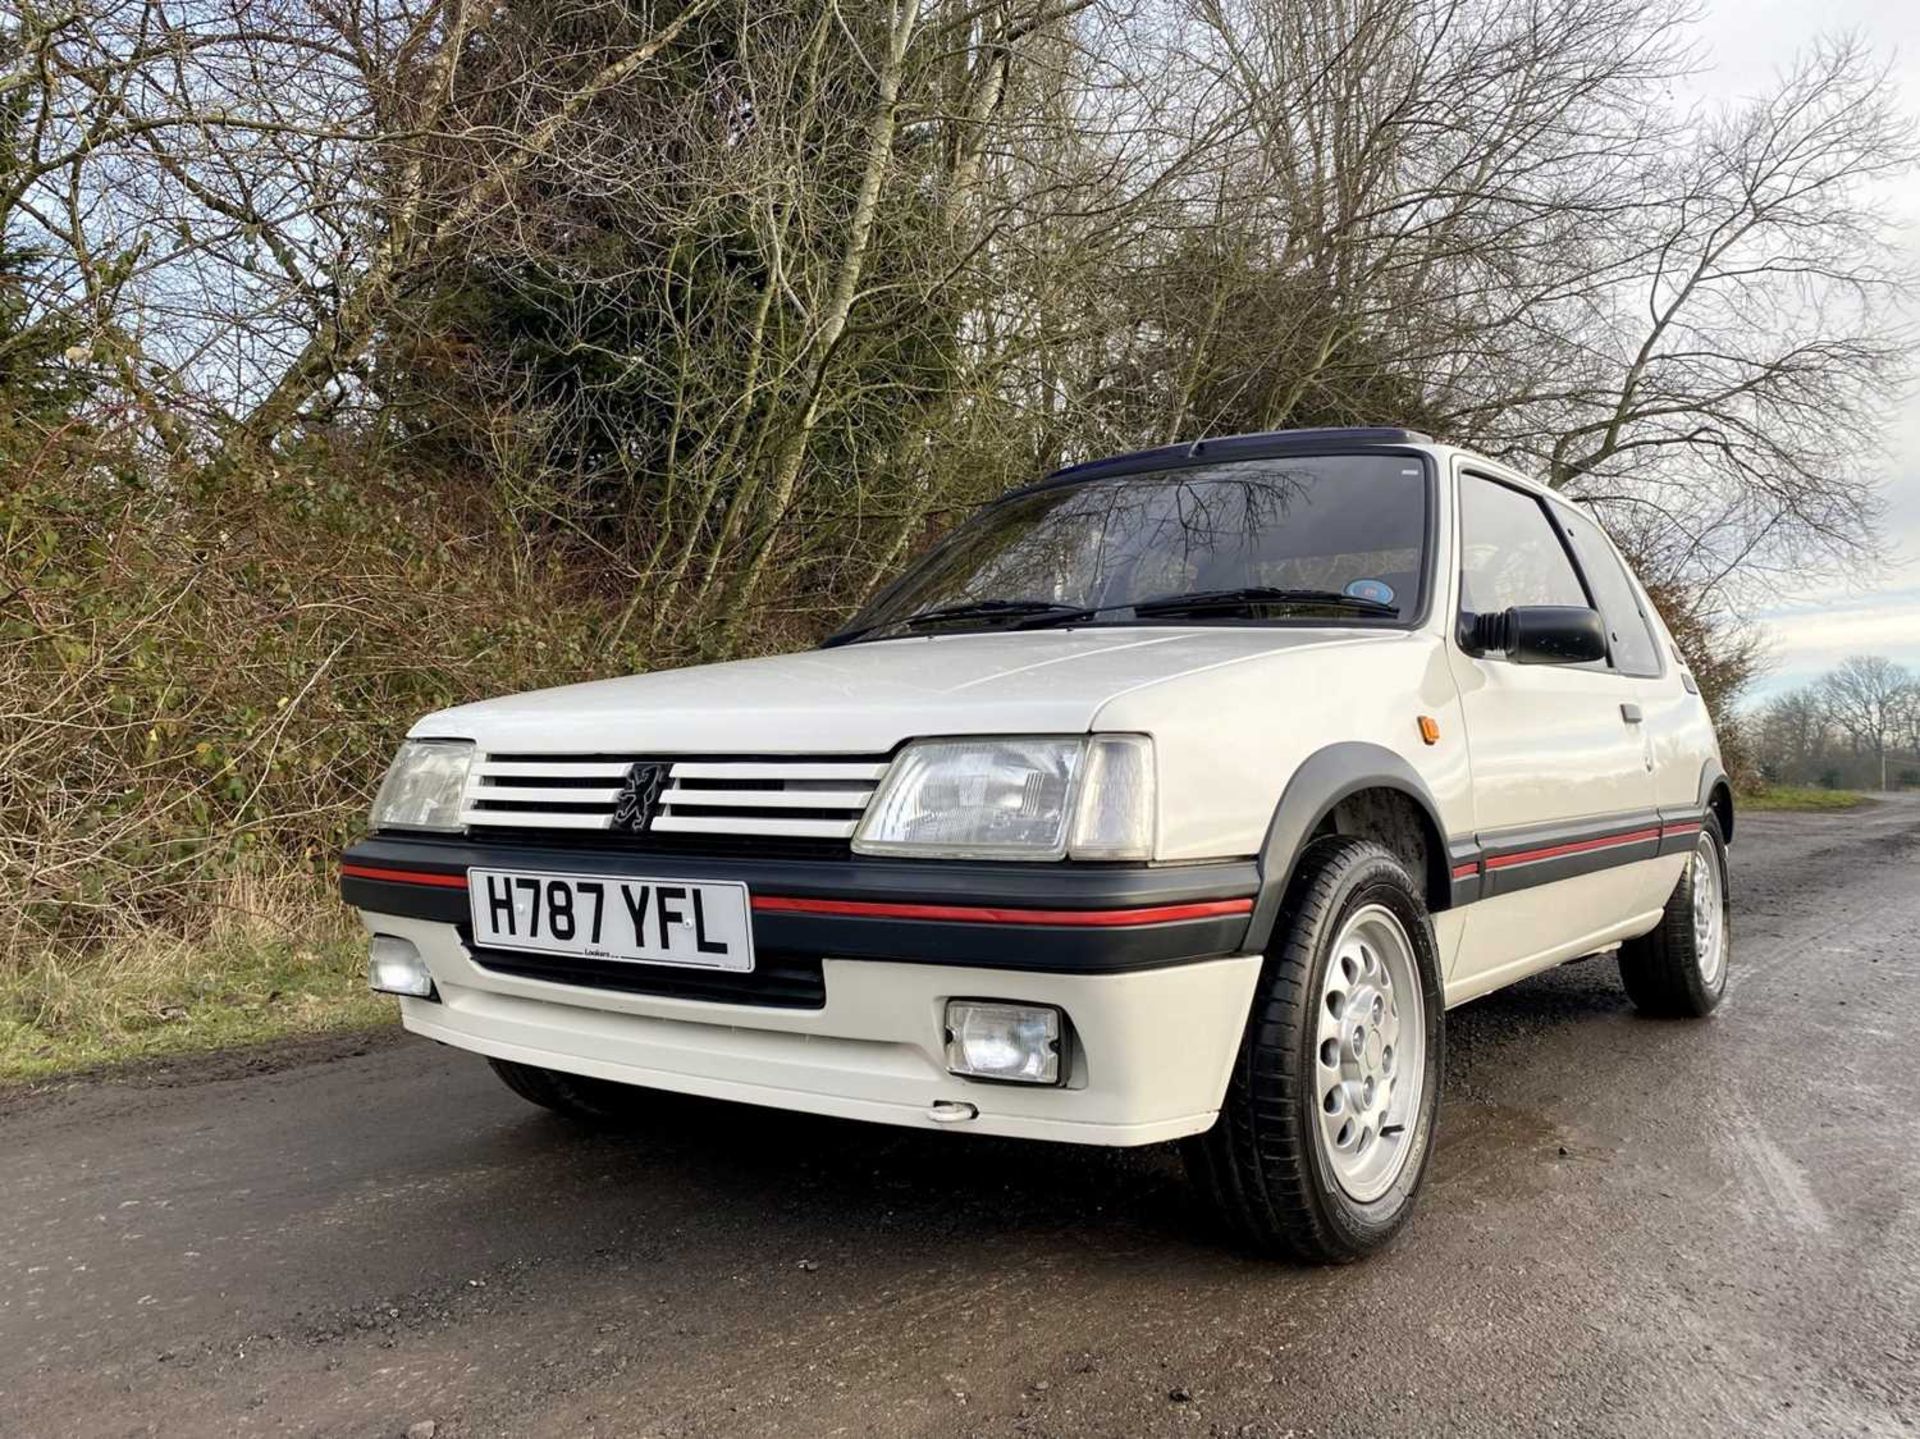 1990 Peugeot 205 GTi 1.6 Only 56,000 miles, same owner for 16 years - Image 2 of 81